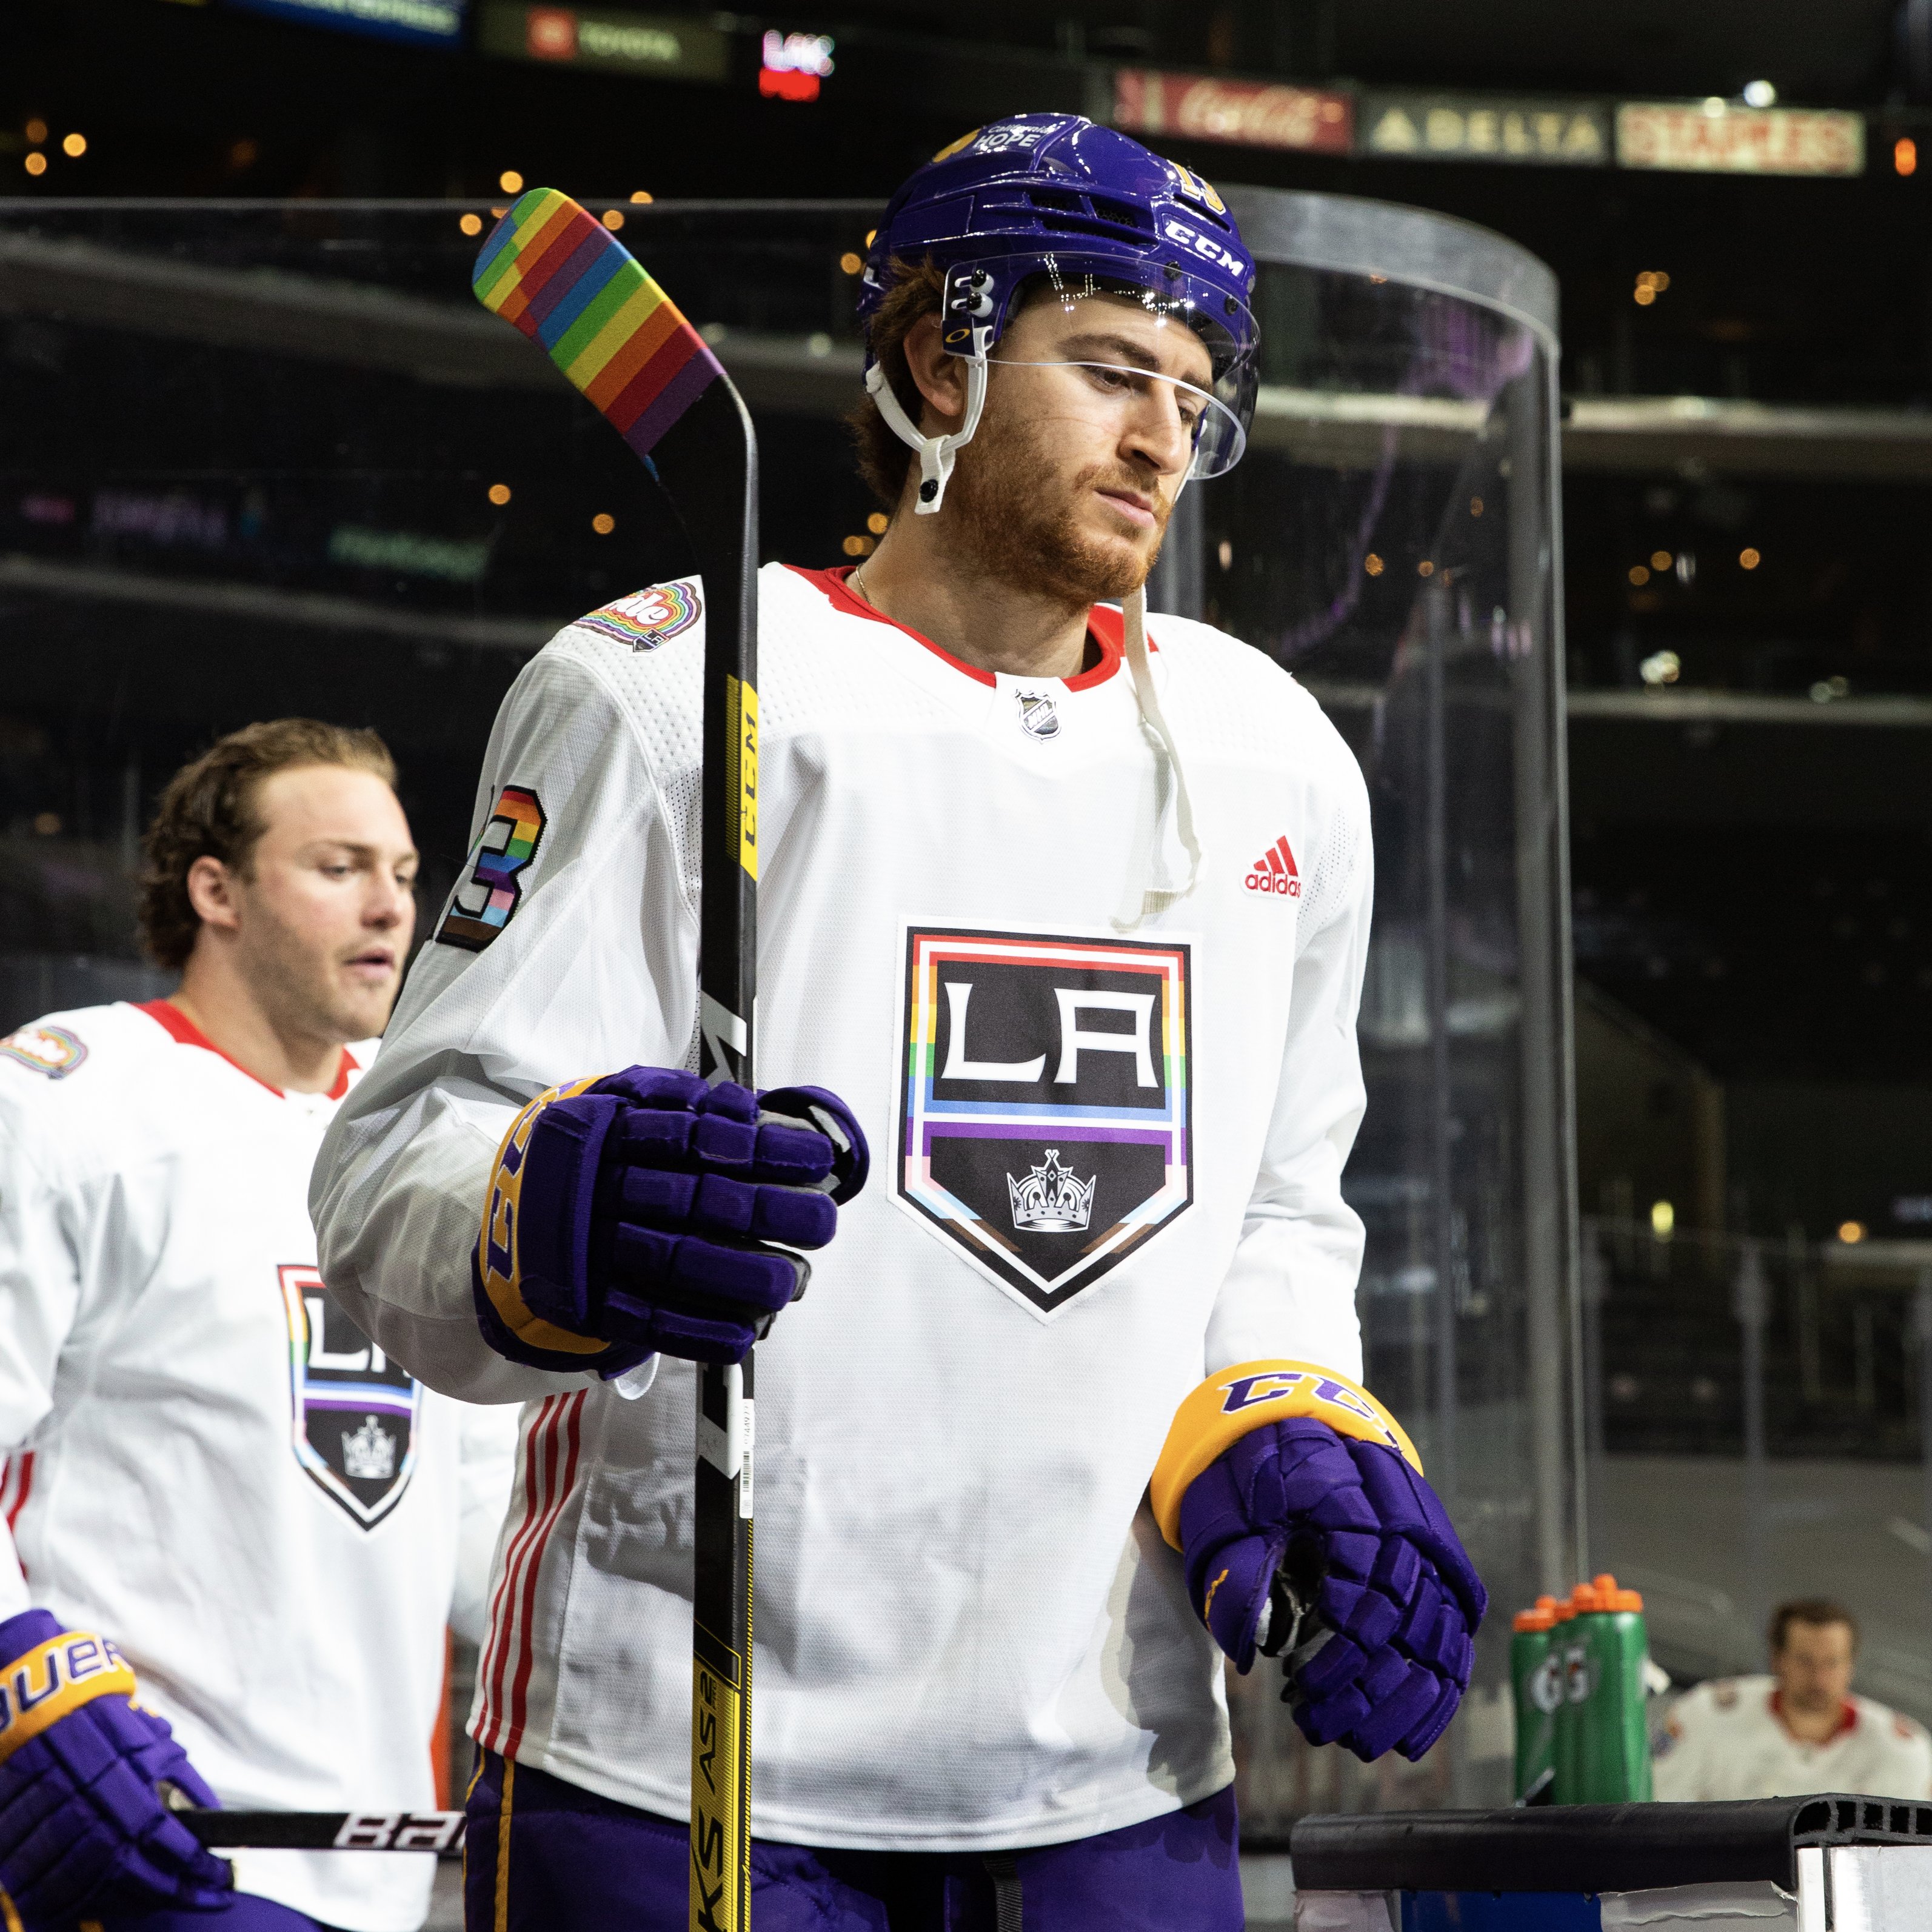 LA Kings - Los Angeles Lakers Night means special auction